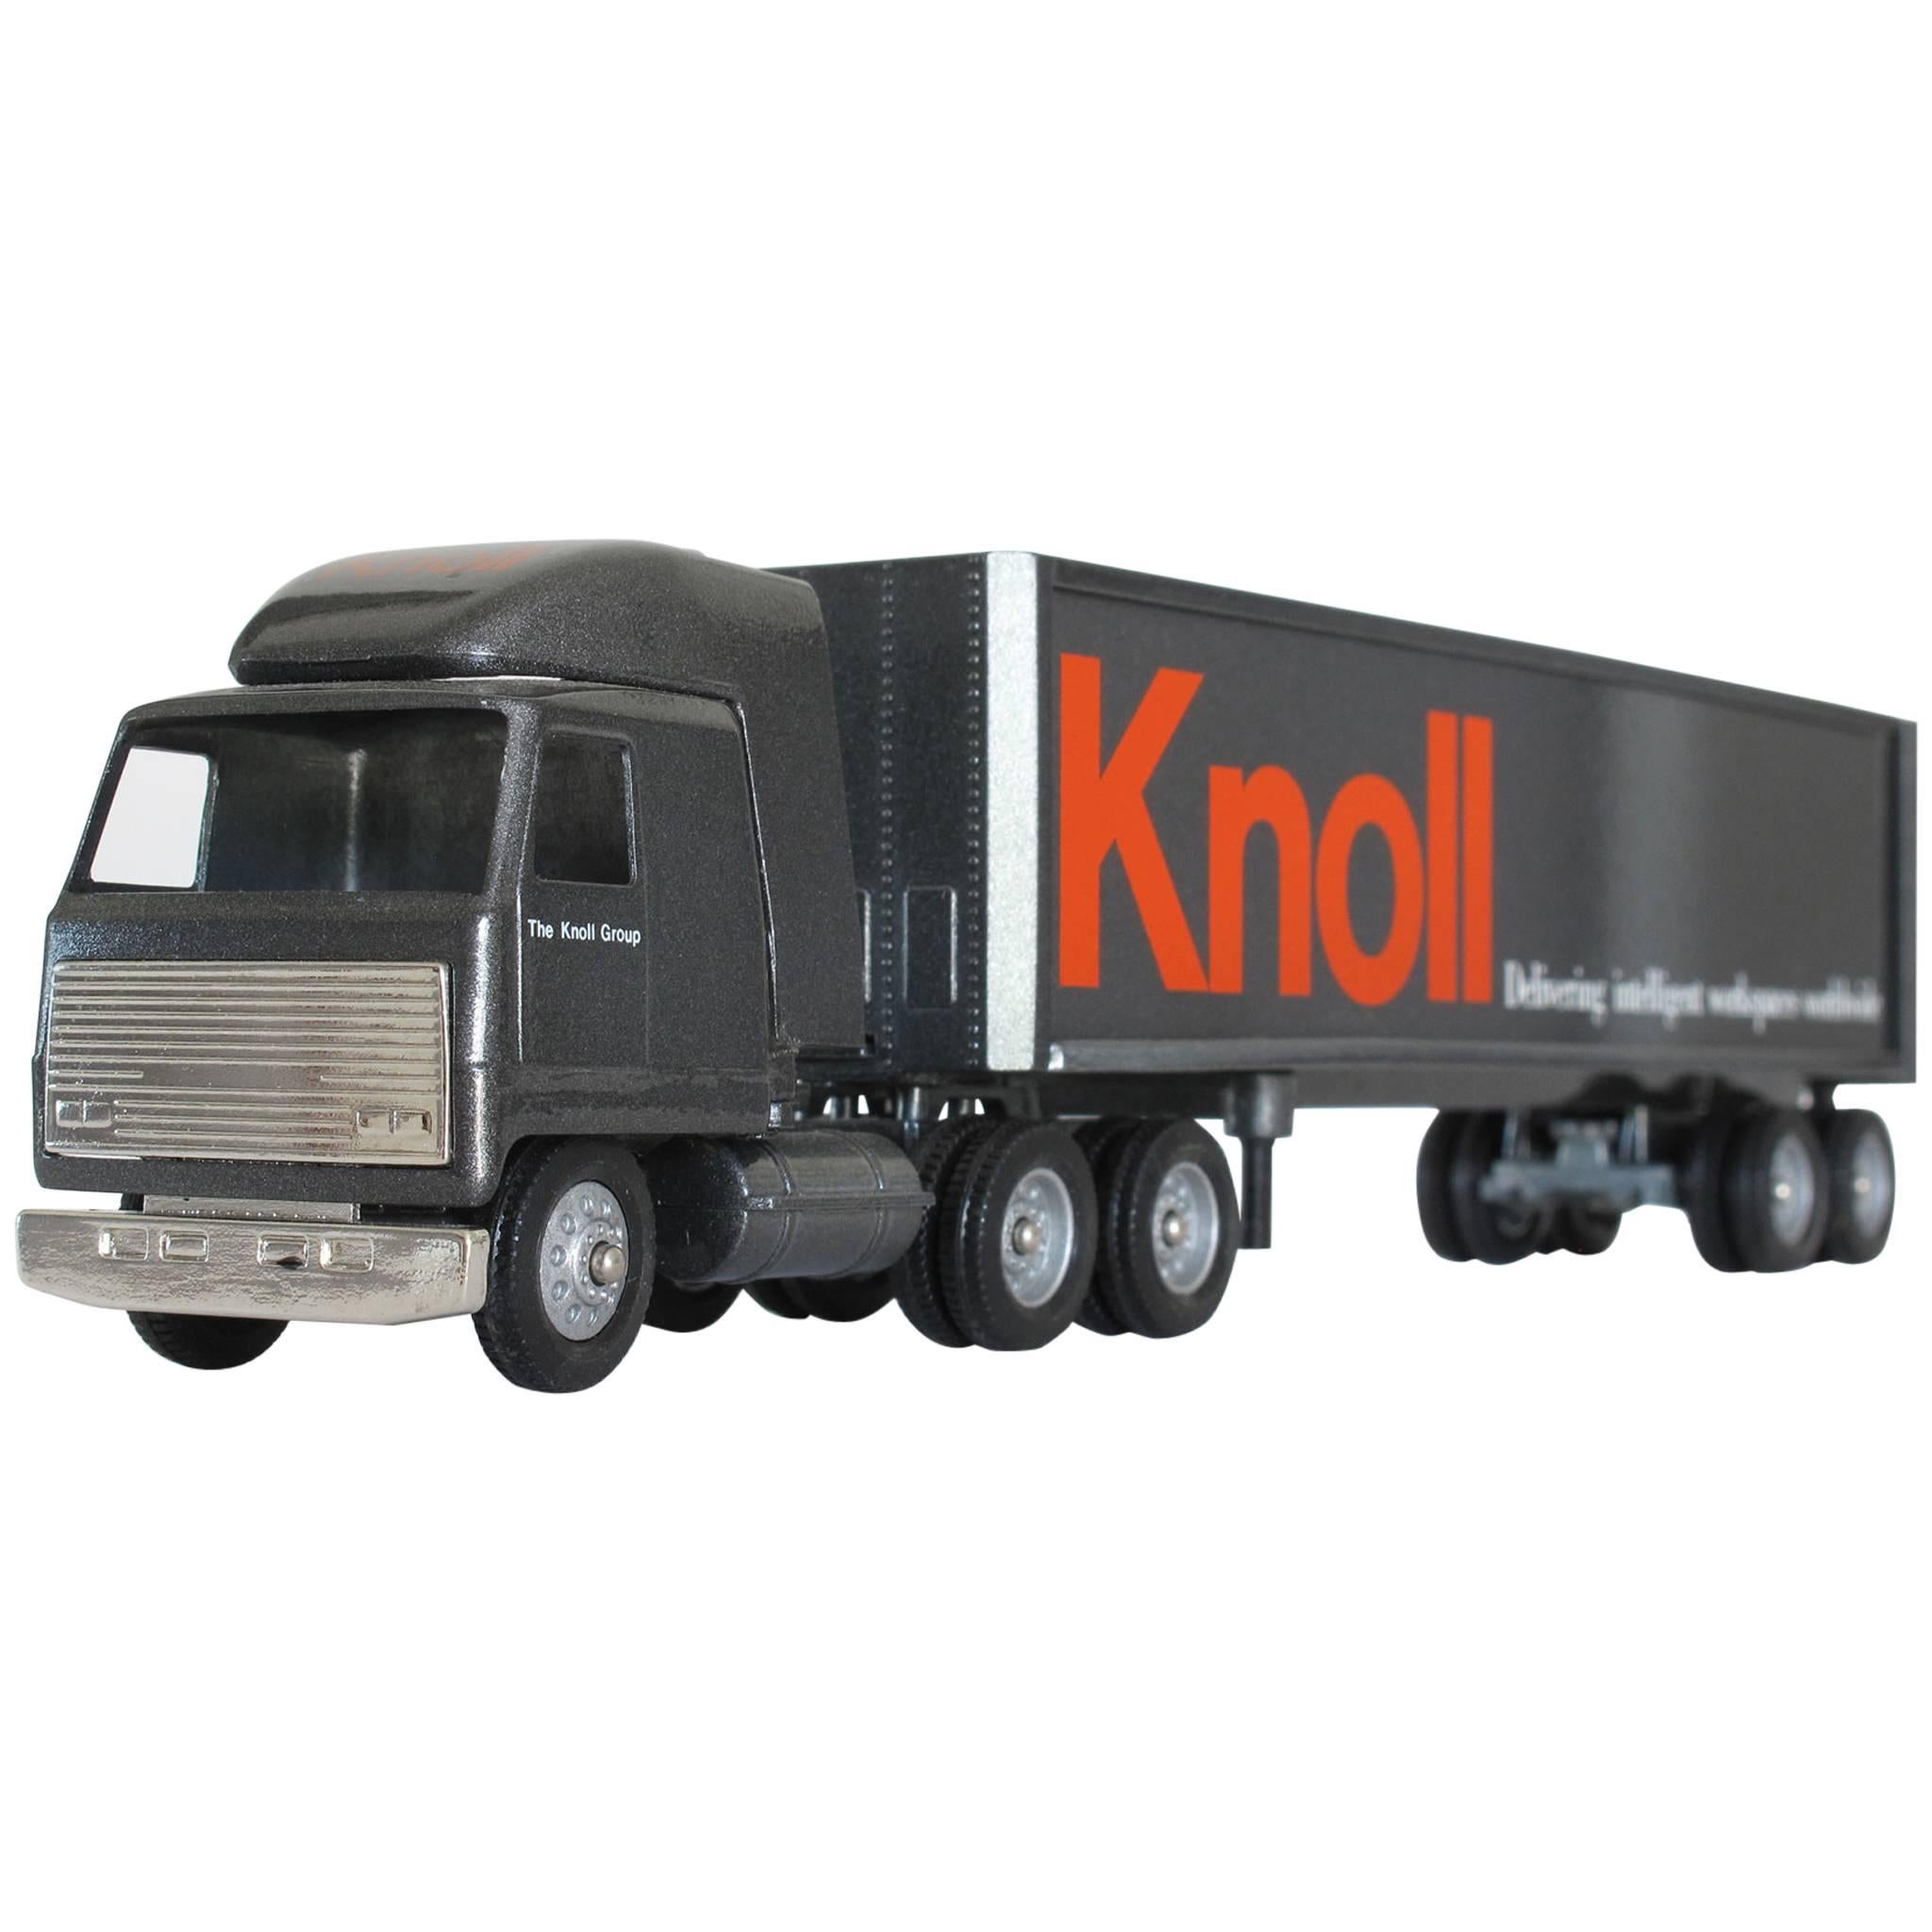 Vintage Knoll Furniture Toy Truck For Sale